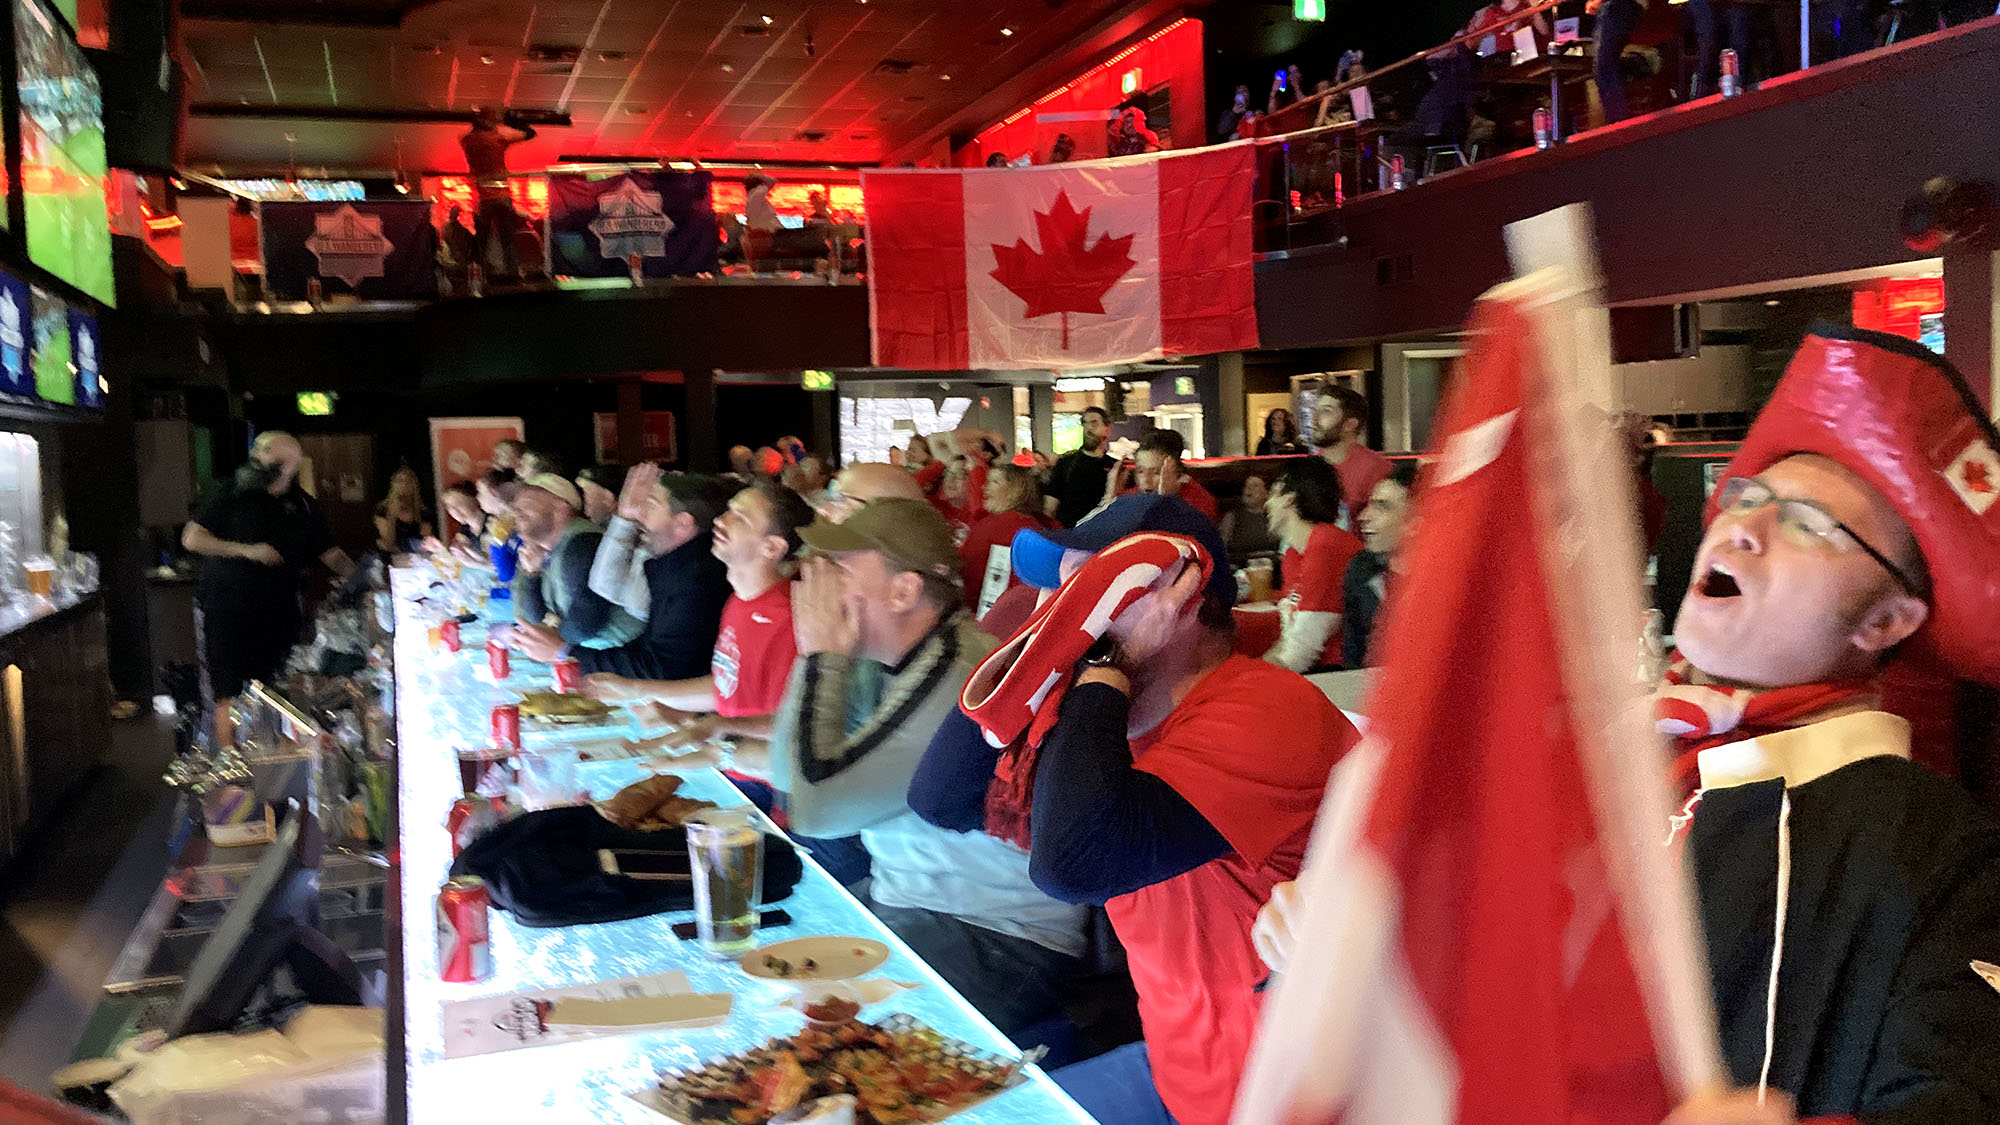 Denton Froese, right, gasps as Canada missed a penalty kick in its FIFA World Cup match versus Belgium on Wednesday. At HFX Sports Bar & Grill, more than 100 people took in Canada's first World Cup game in 36 years.